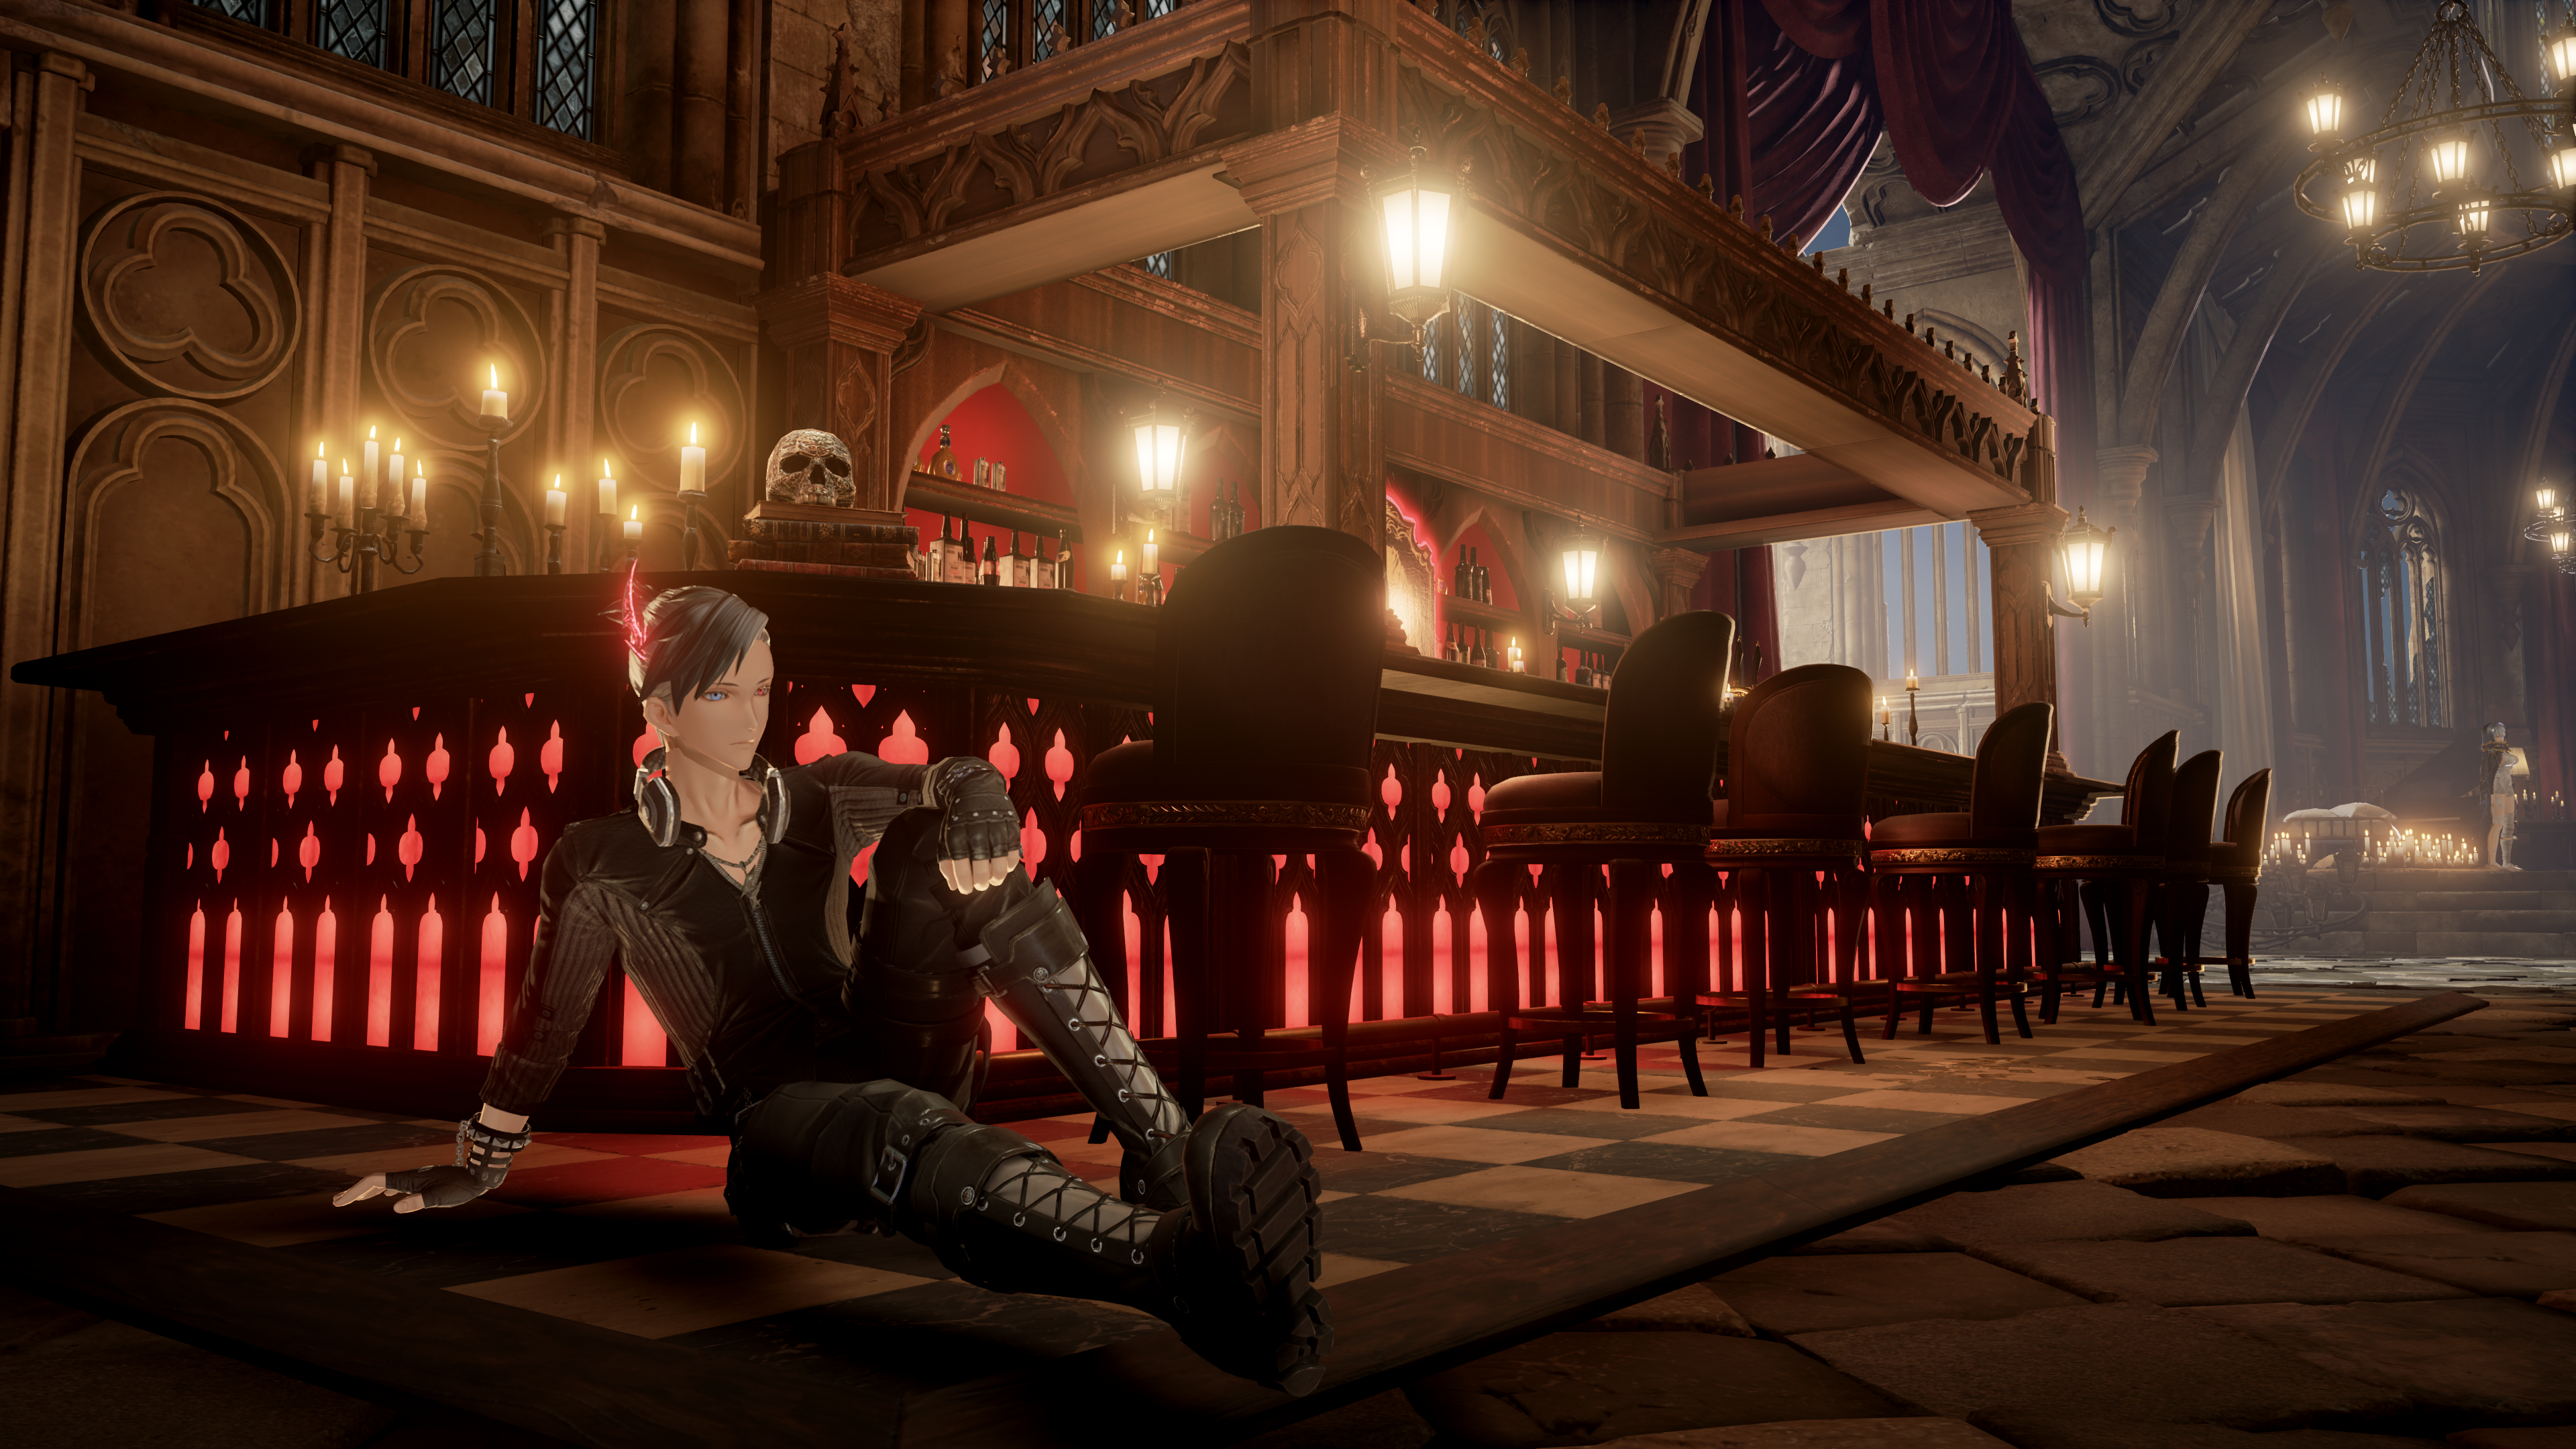 Code Vein Custom Custom Made Chara Bartender Gothic Chair Candles Red Architecture Black Punk Rock F 3840x2160